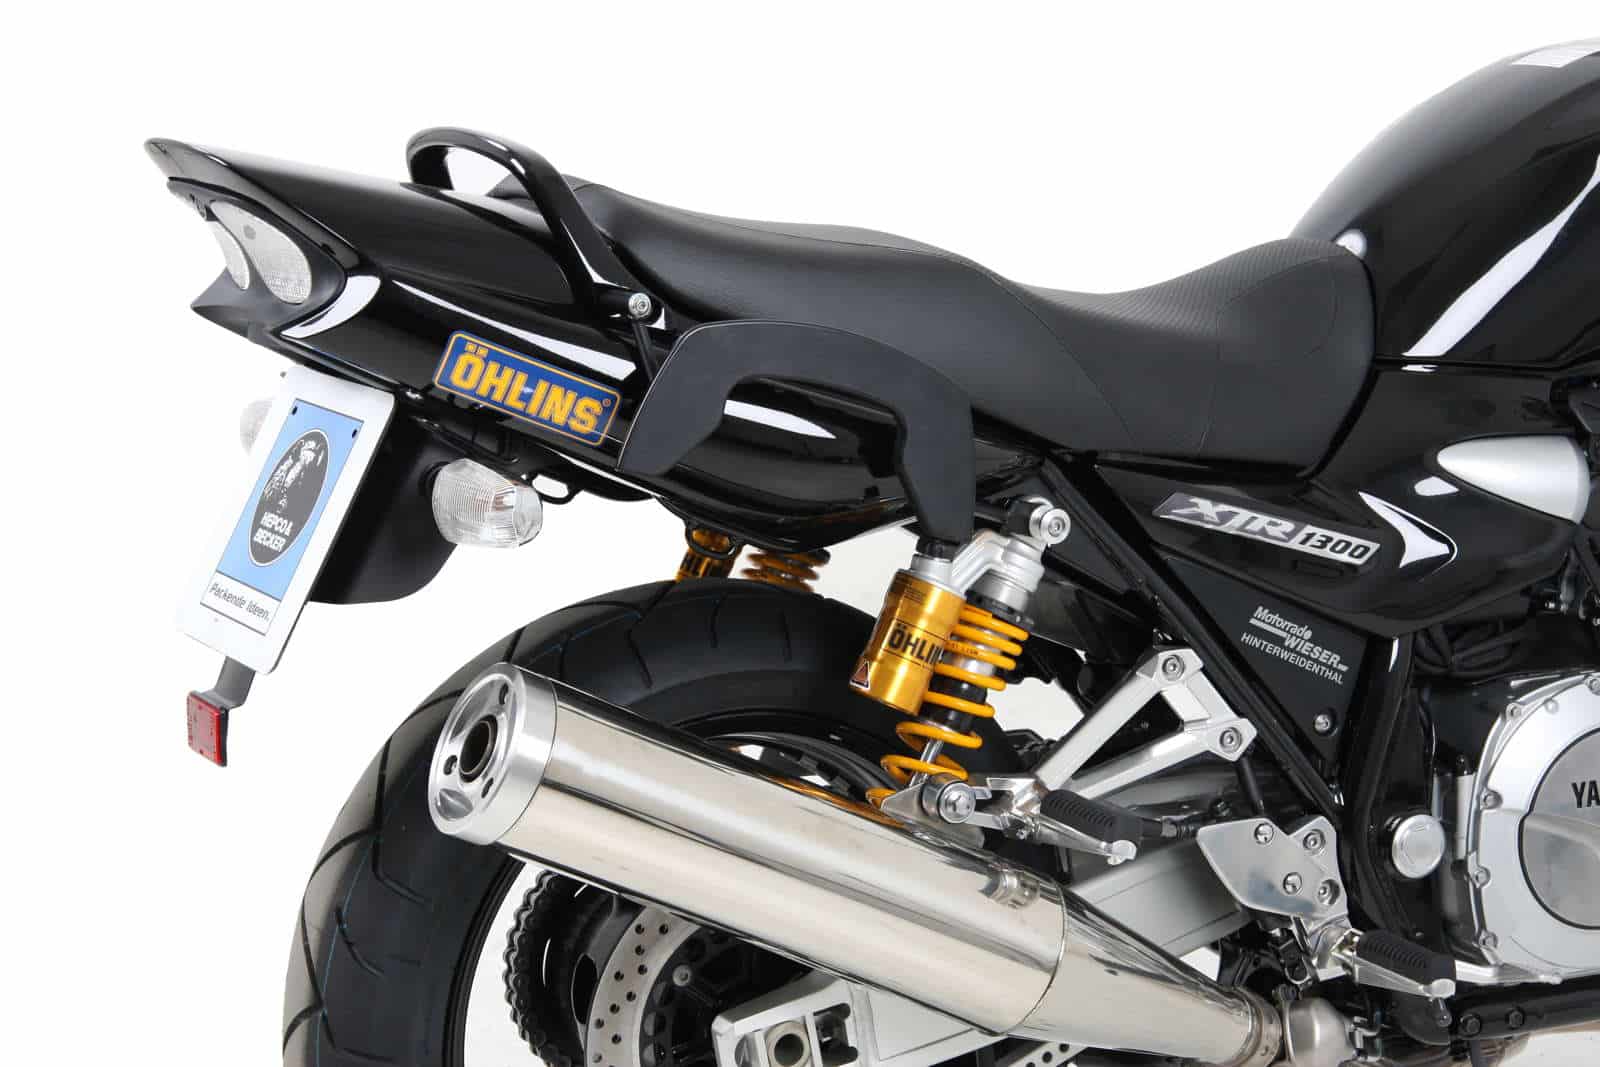 C-Bow sidecarrier for Yamaha XJR 1300 (2007-2013)